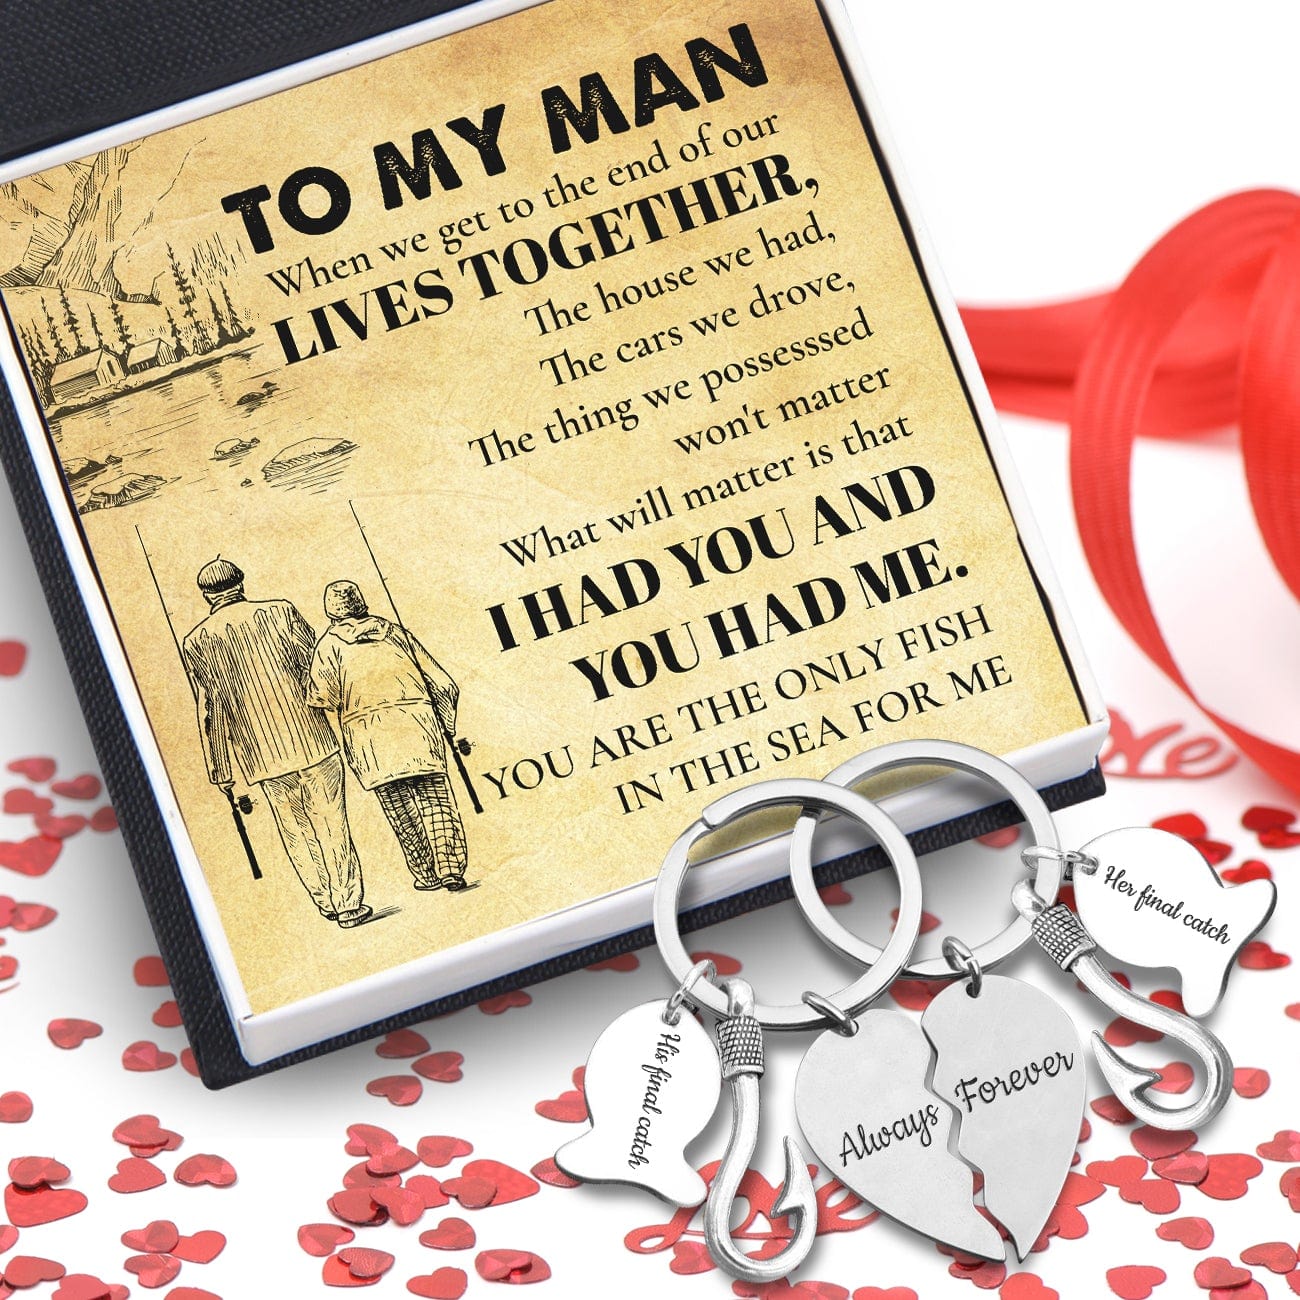 Fishing Heart Puzzle Keychains - Fishing - To My Man - I Had You And You Had Me - Gkbn26006